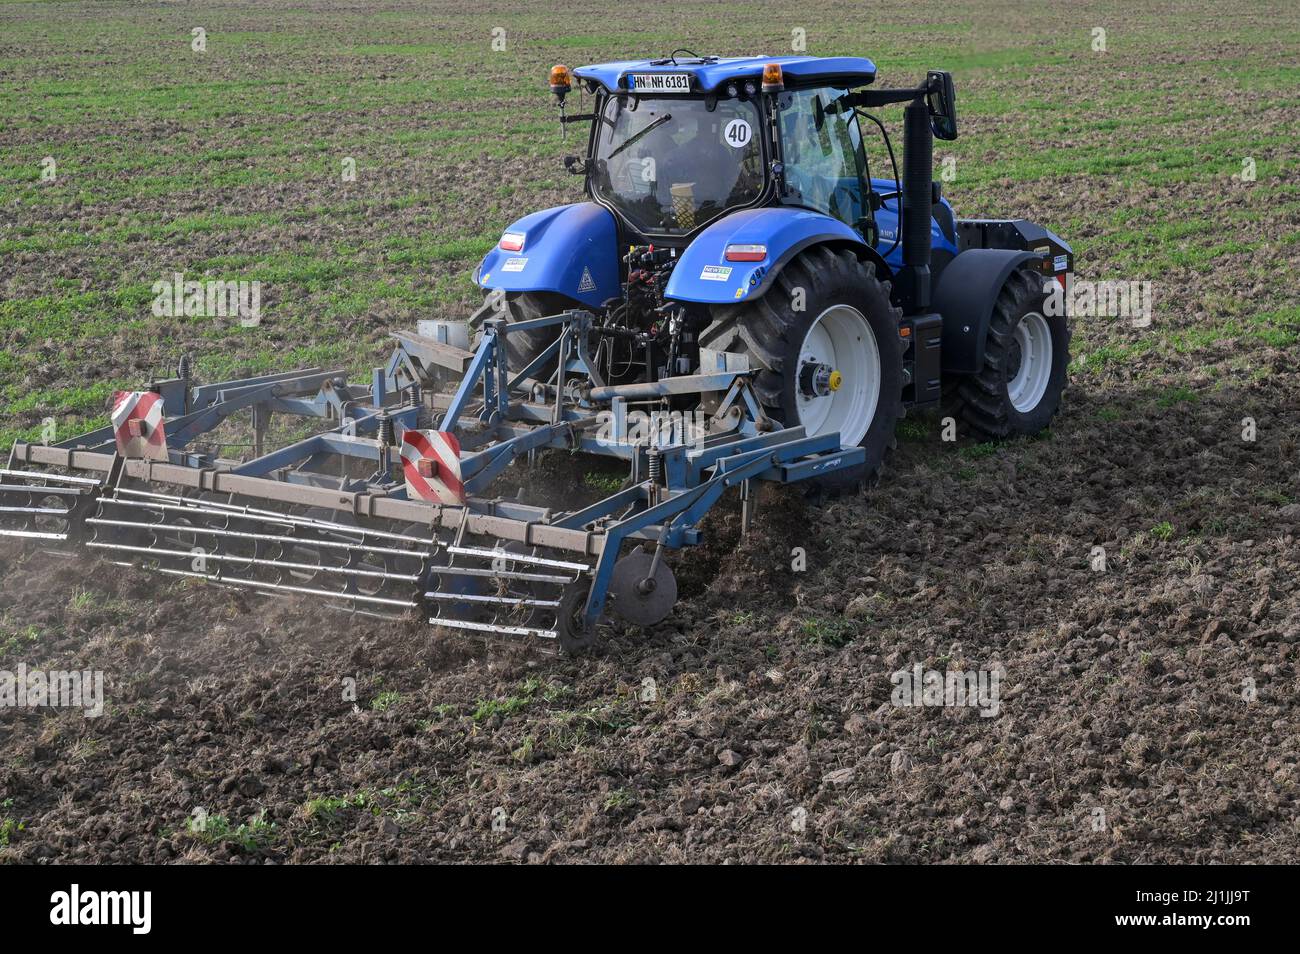 Germany, New Holland Tractor T6.180 with gas engine powered by BioMethane  gas CNG, working on field soil preperation / DEUTSCHLAND, Damnatz im  Wendland, neuer New Holland Traktor T6.180 mit Methanpower mit Gasmotor